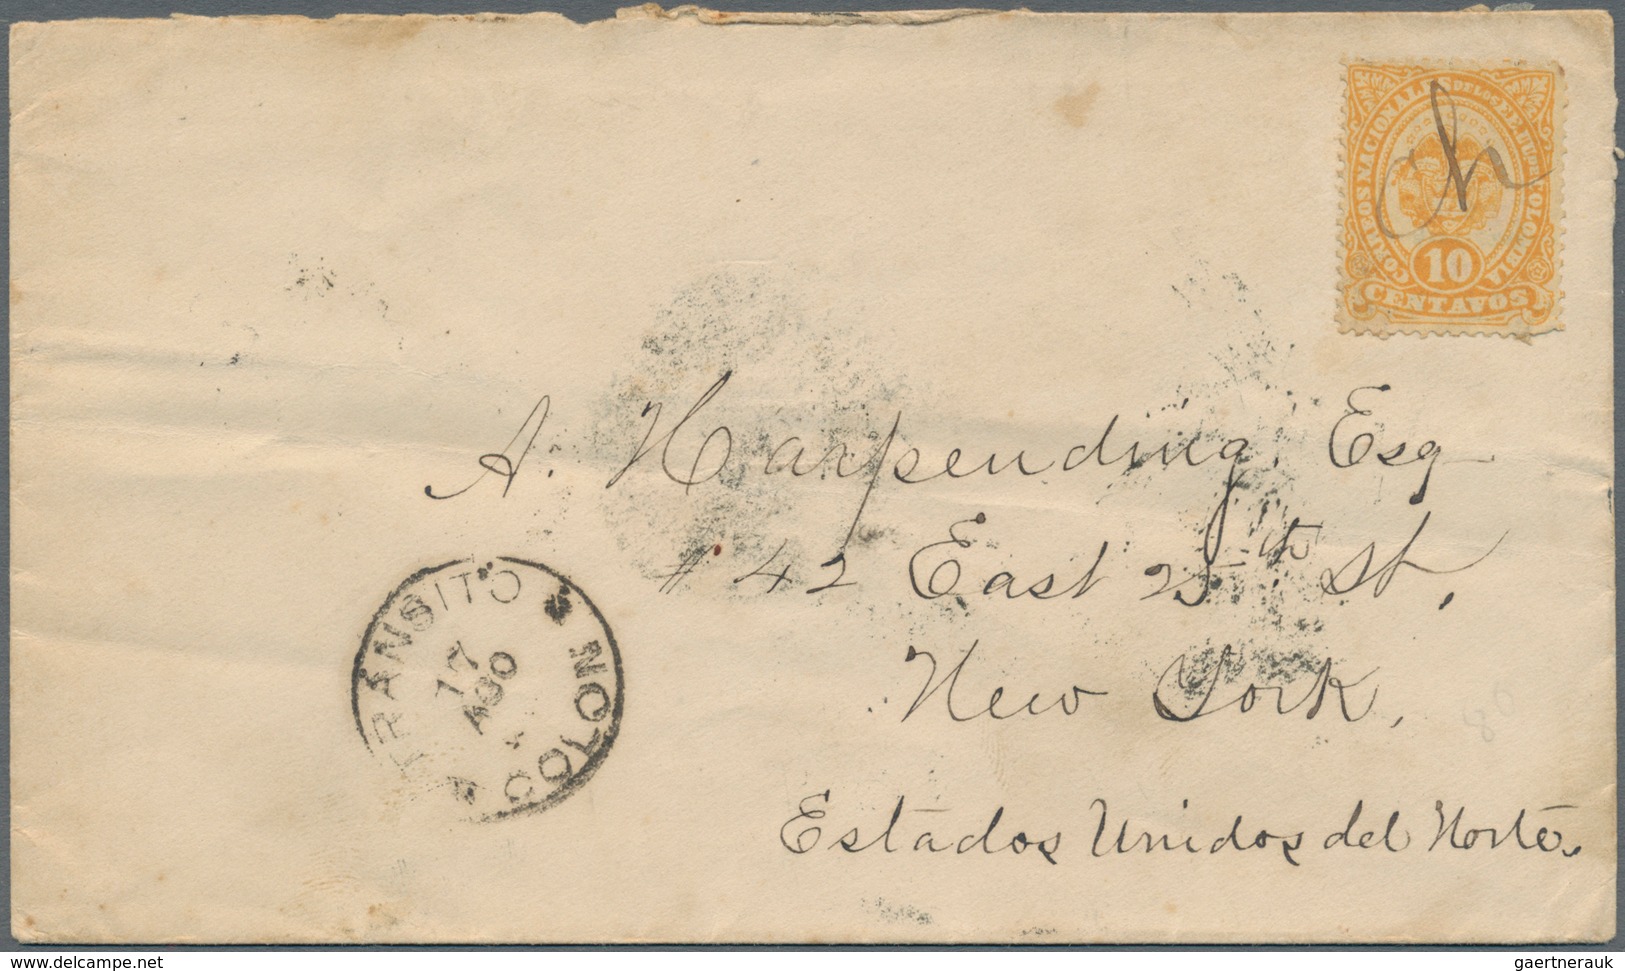 Kolumbien: 1884/1886, group of 4 covers, each with single franking 10 C orange on yellow "coat of ar